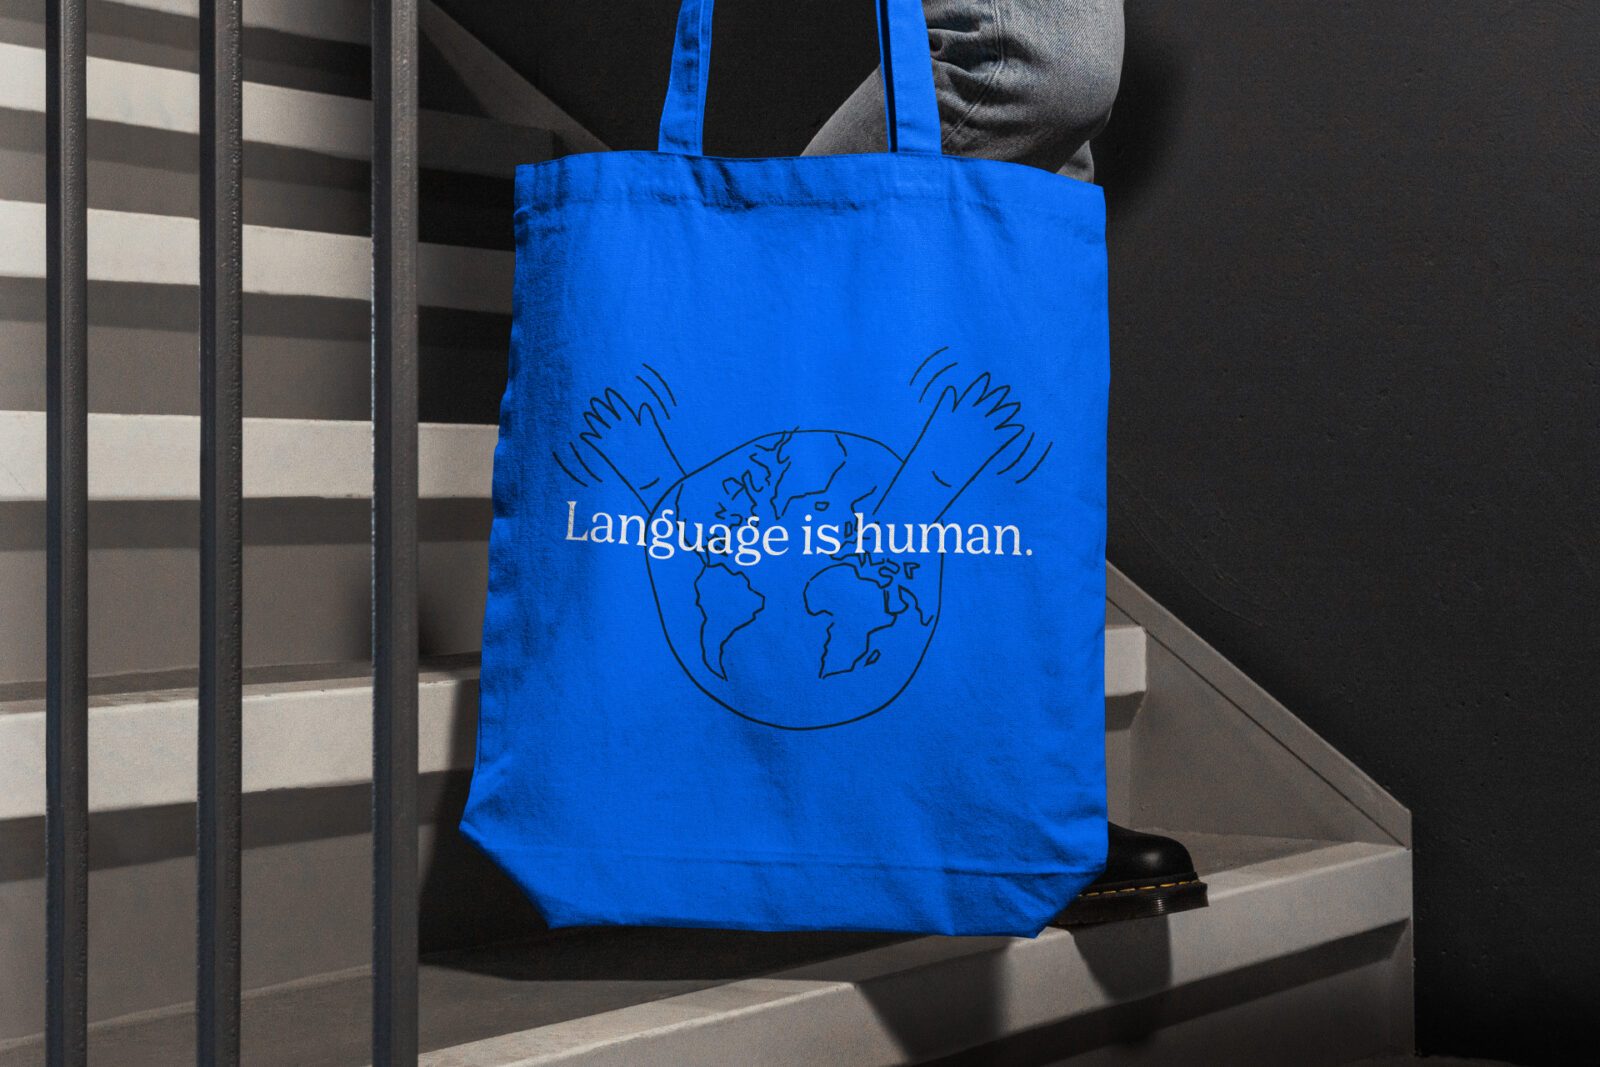 TalkAbroad branded tote bag and brand language